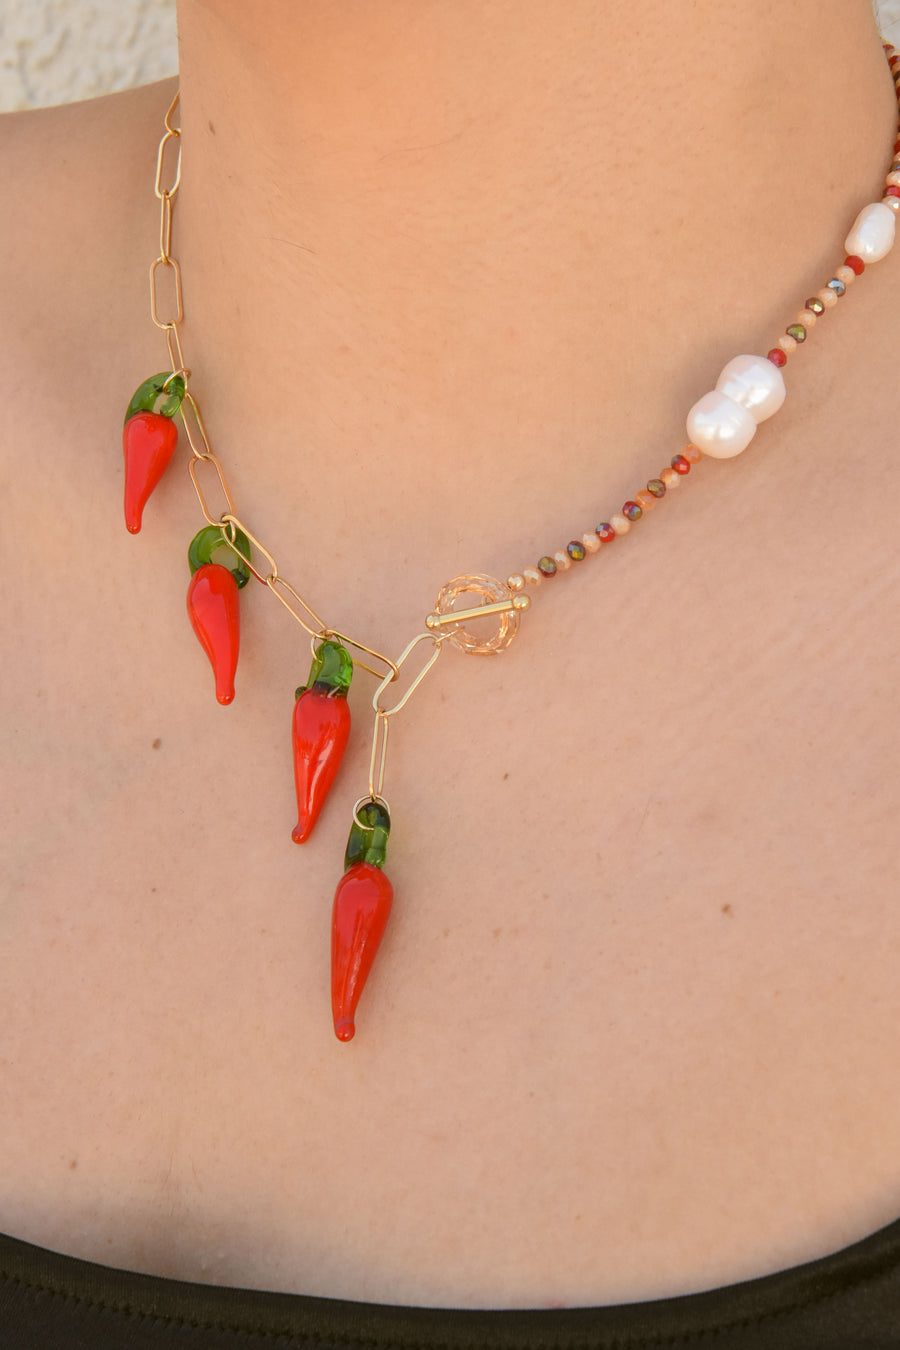 Cute Small Red Chilli Pepper Necklace Choker Chain Statement Necklace Set  for Women Simple Red Chilli Earrings Elegant Jewelry